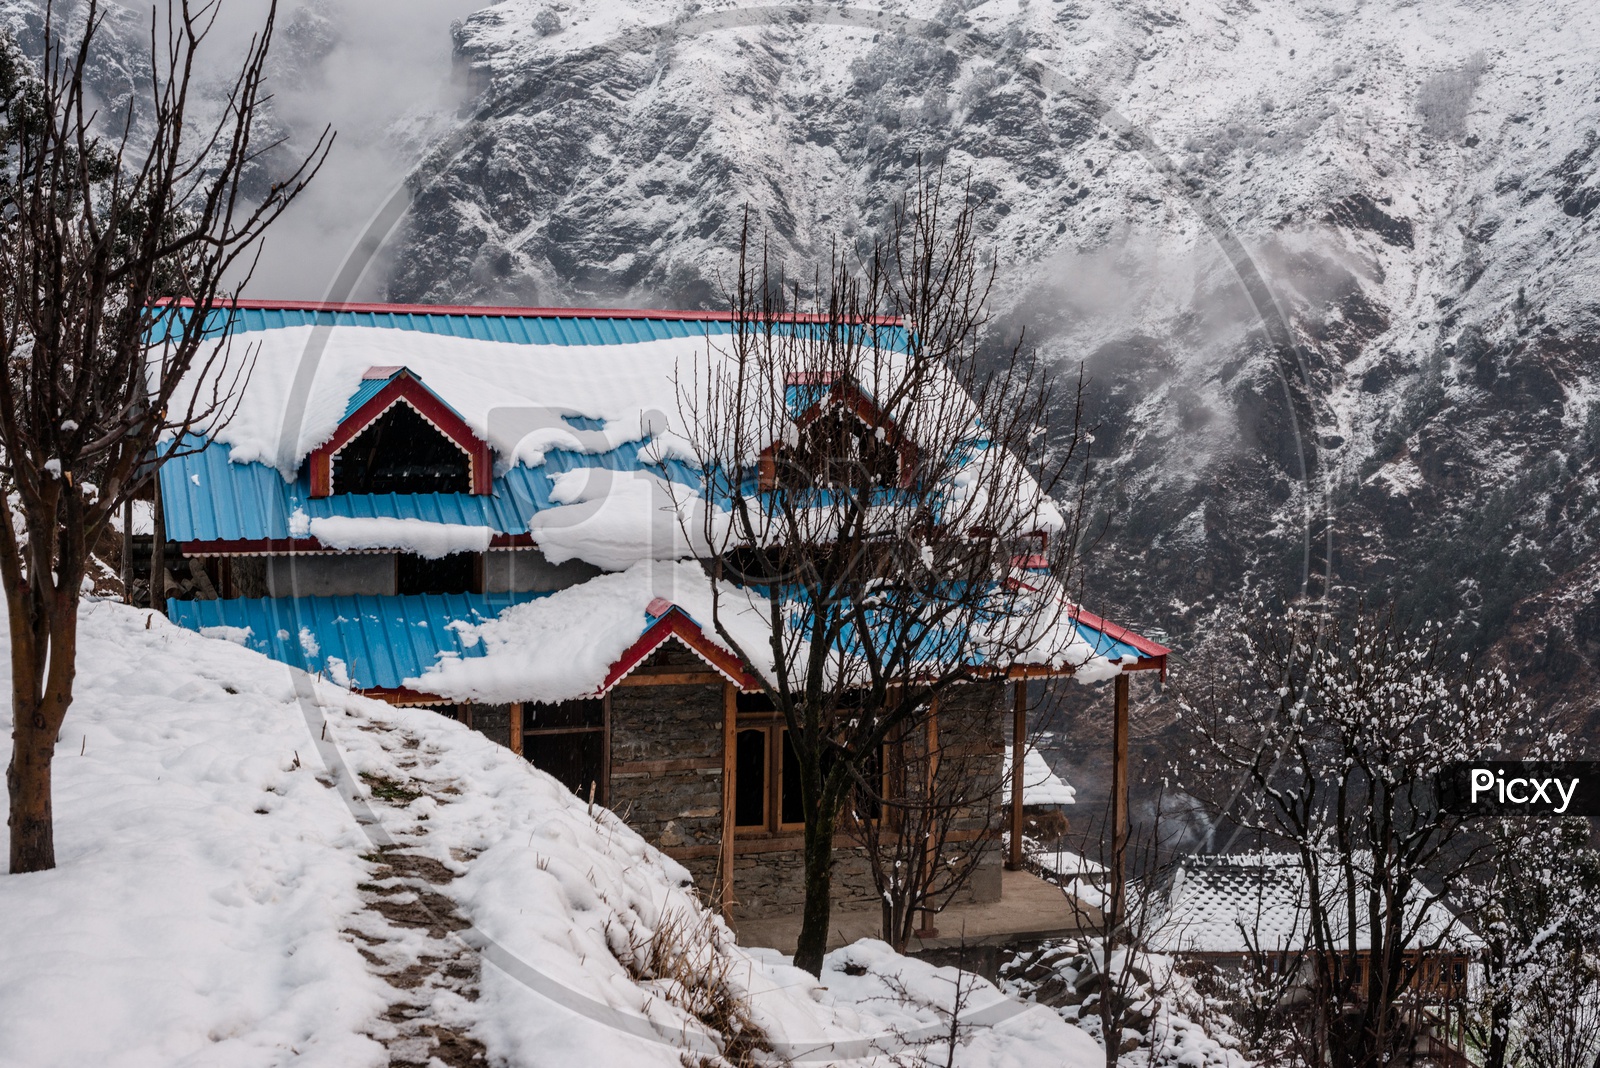 A Wooden House covered with Snow and Snow caped mountain range in Background